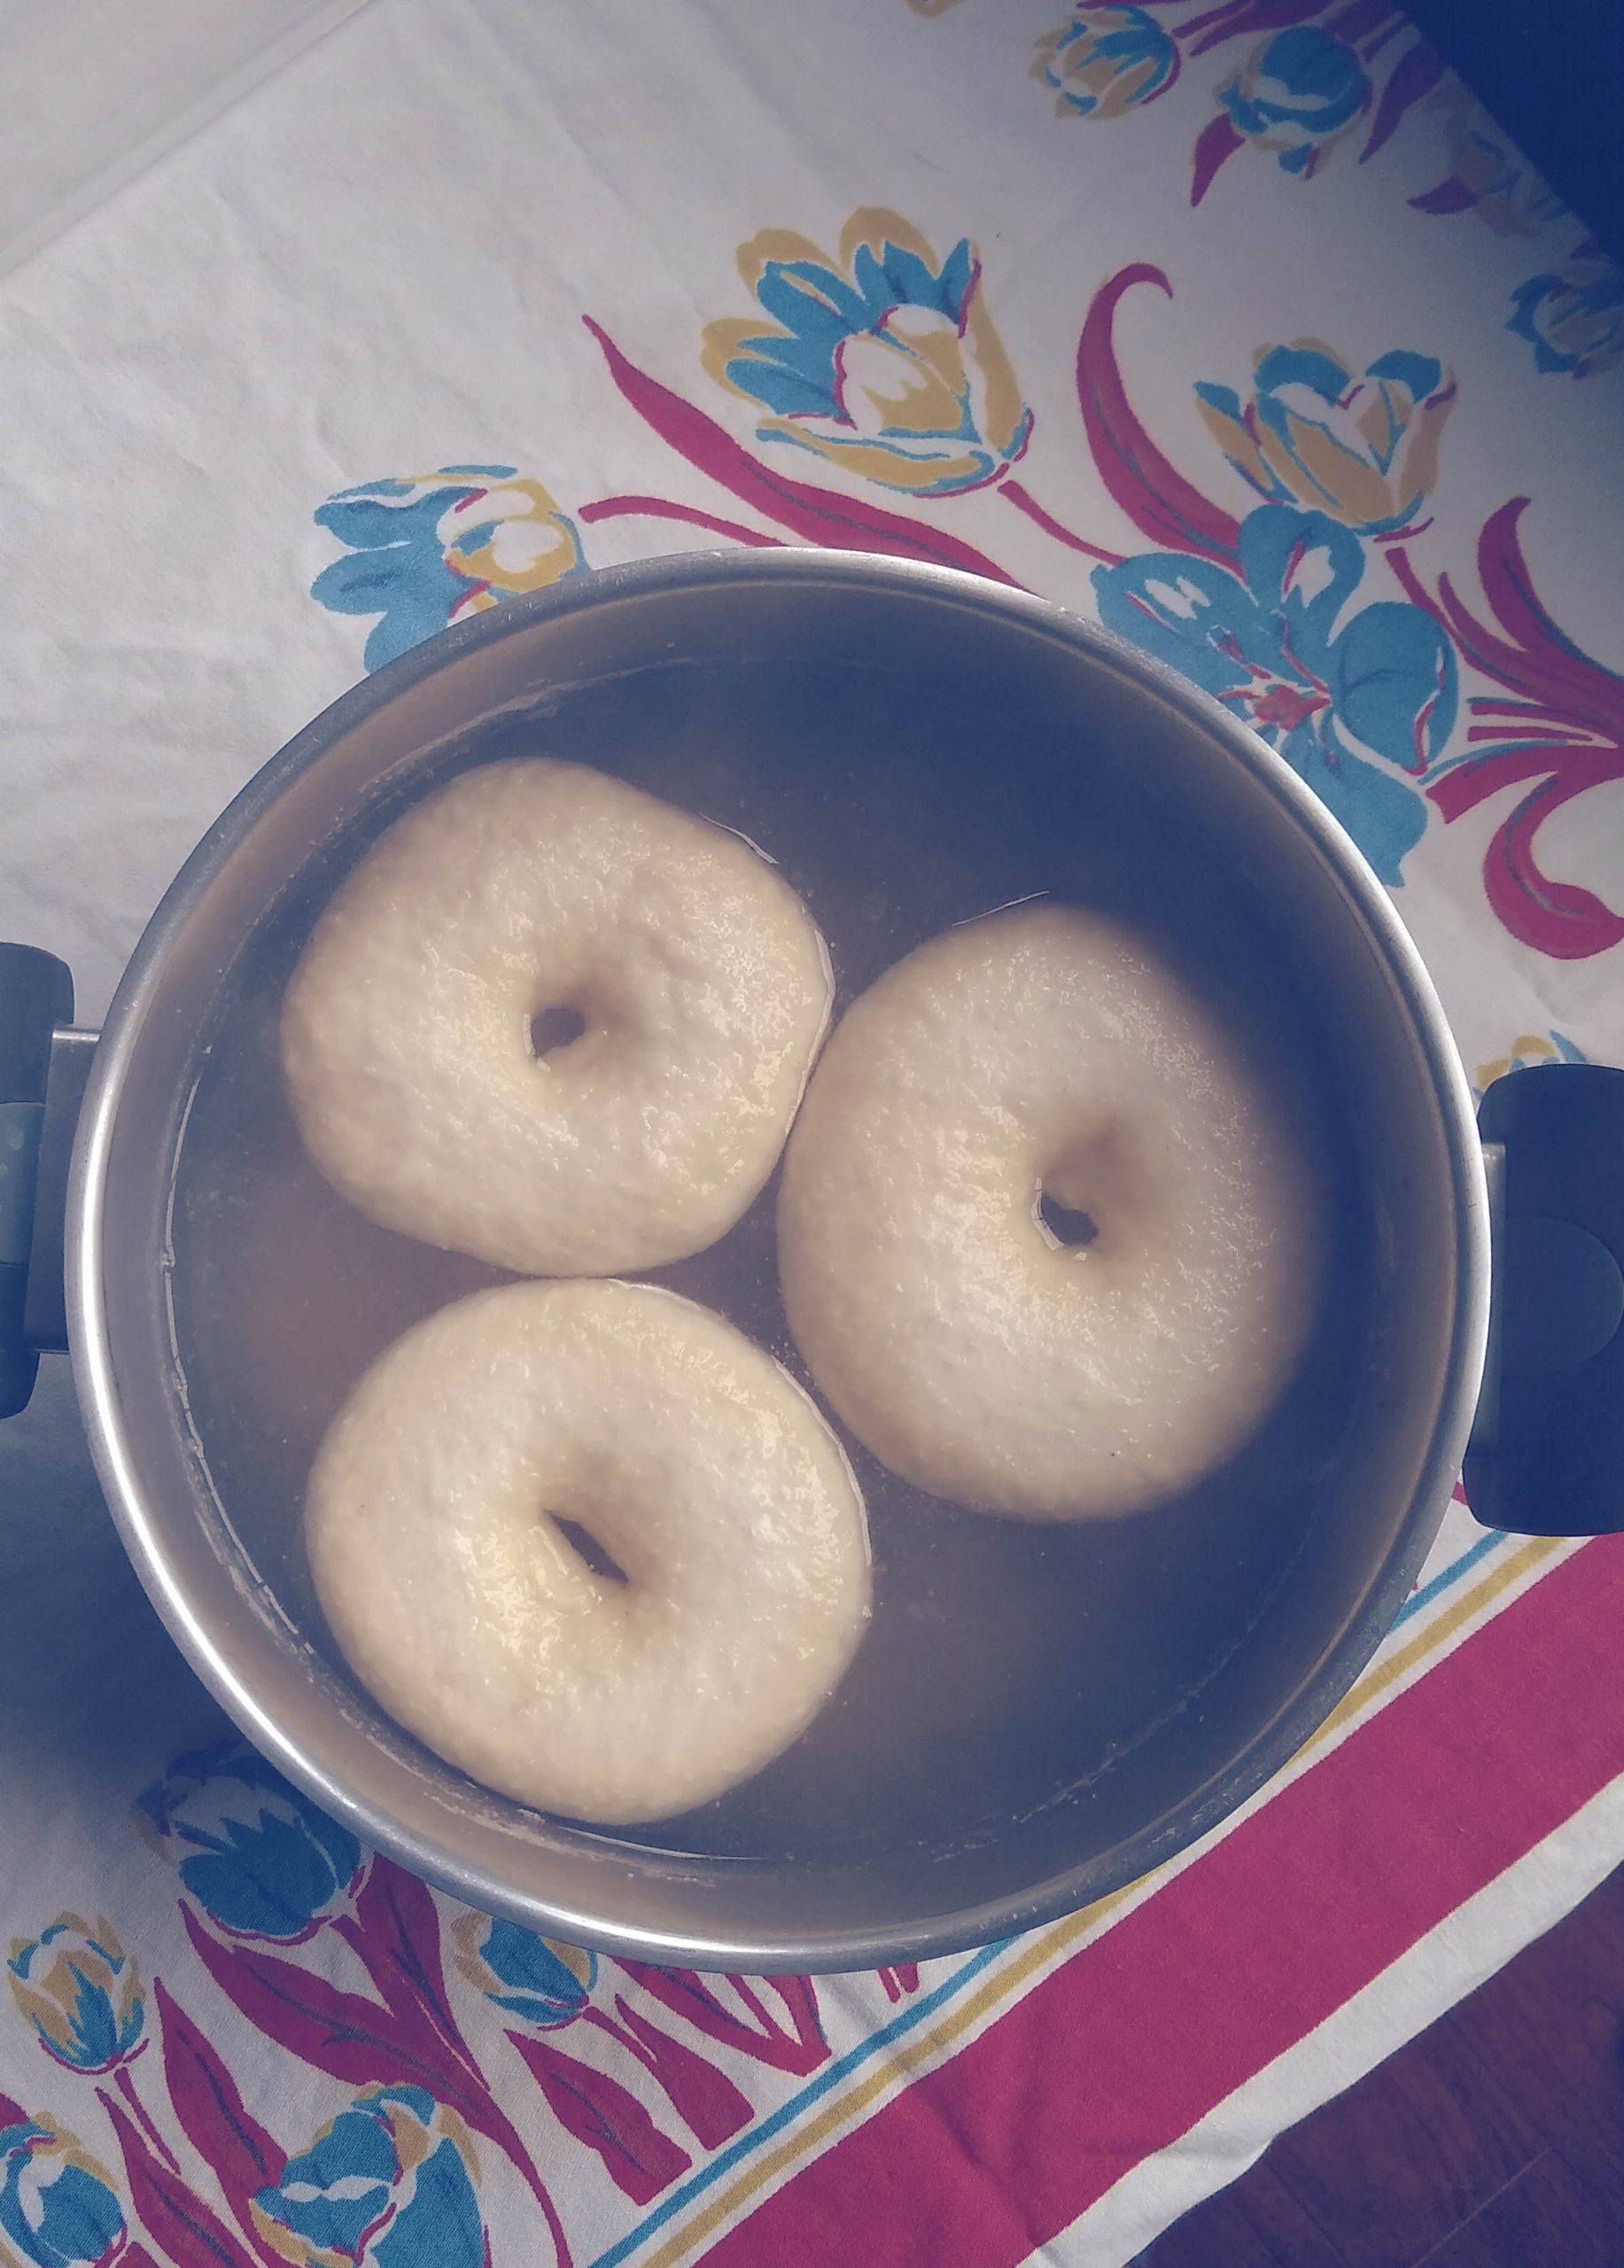 Making bagels at home is super rewarding. They are unlike any others. Fresh from the oven, soft and chewy. Perfect. My kids and I love having fresh bagels on hand. Batches of bagels don't usually last long in our house.